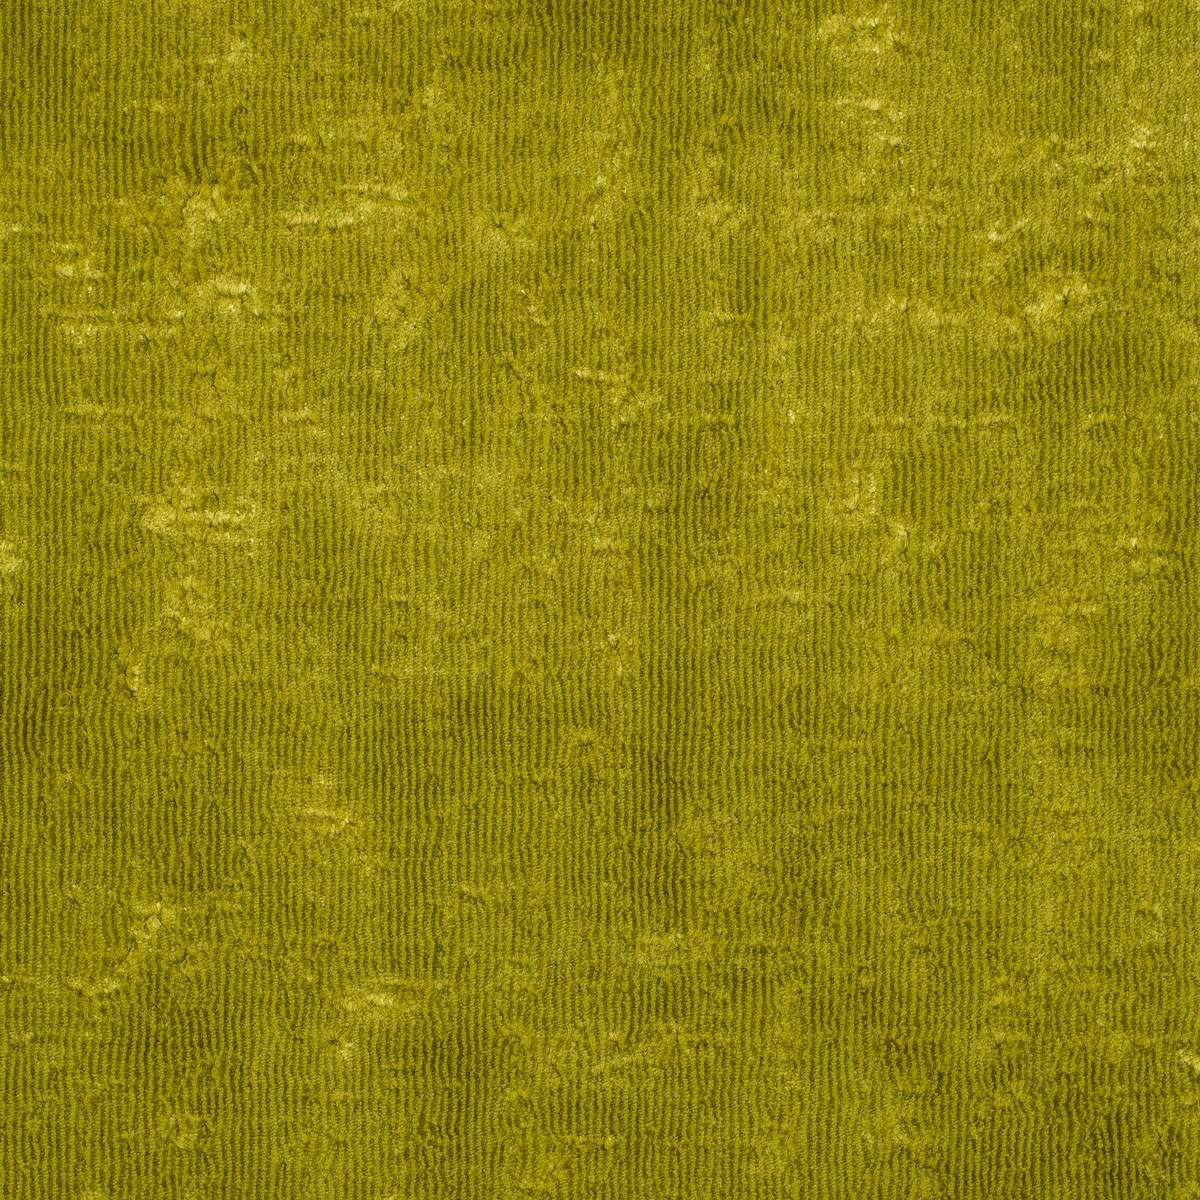 Curzon Antique Gold Fabric by Zoffany